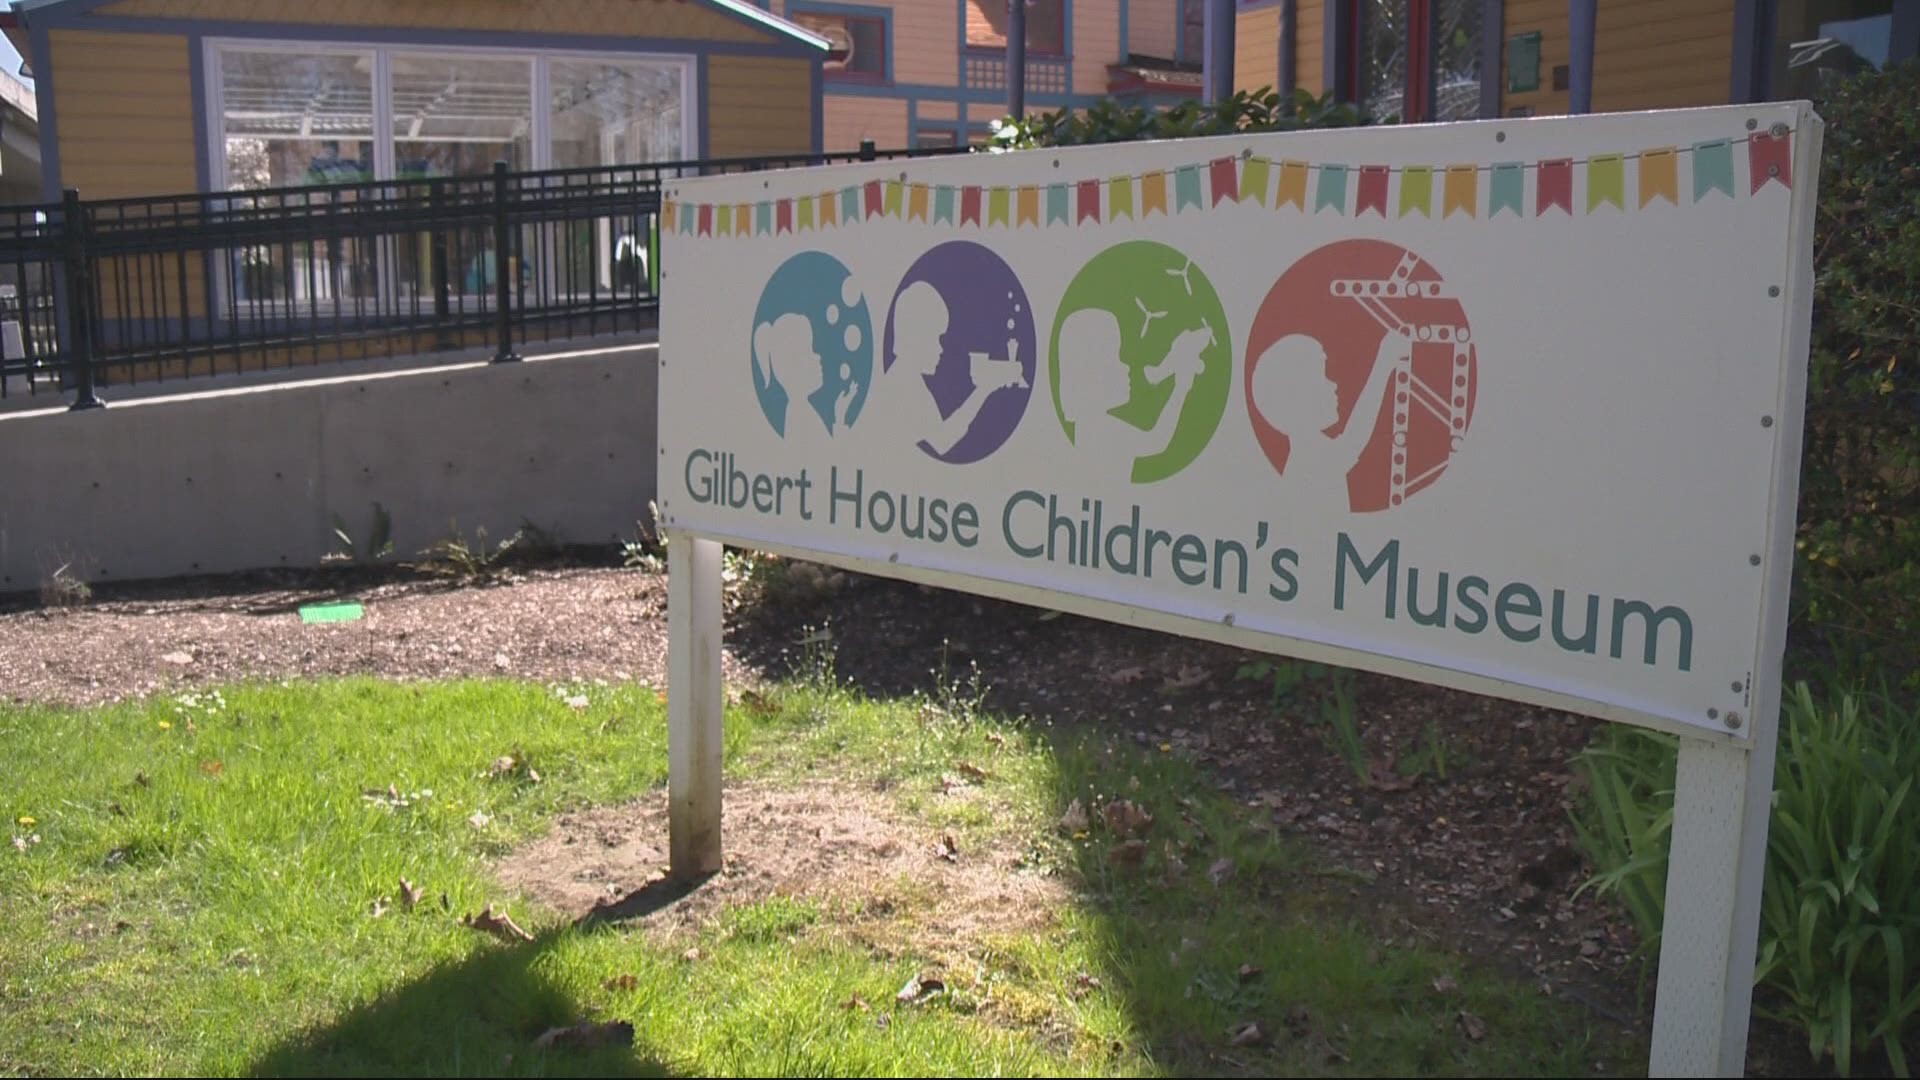 The Gilbert House Children’s Museum in Salem is reopening with a focus on safety for families. Jon Goodwin shows us how they’re doing it.